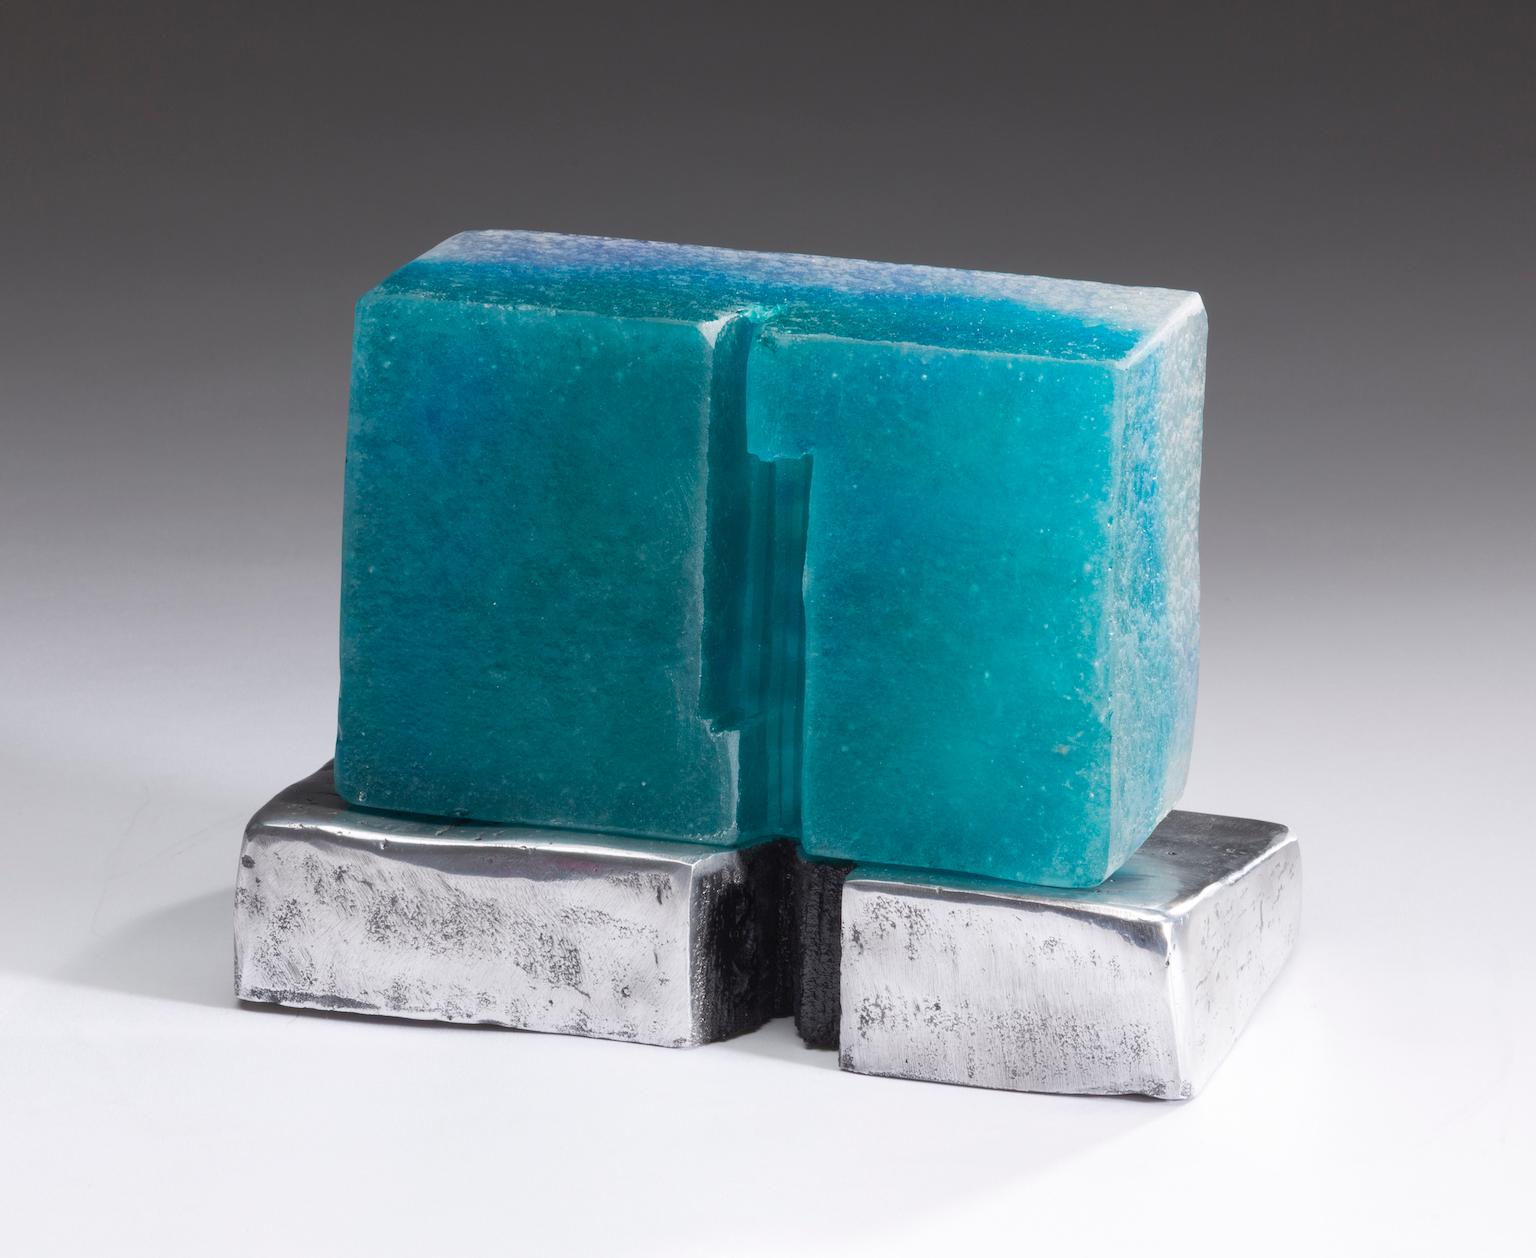  Kiln Casted Glass and Sand Cast Aluminum Modern Tabletop Sculpture Turquoise